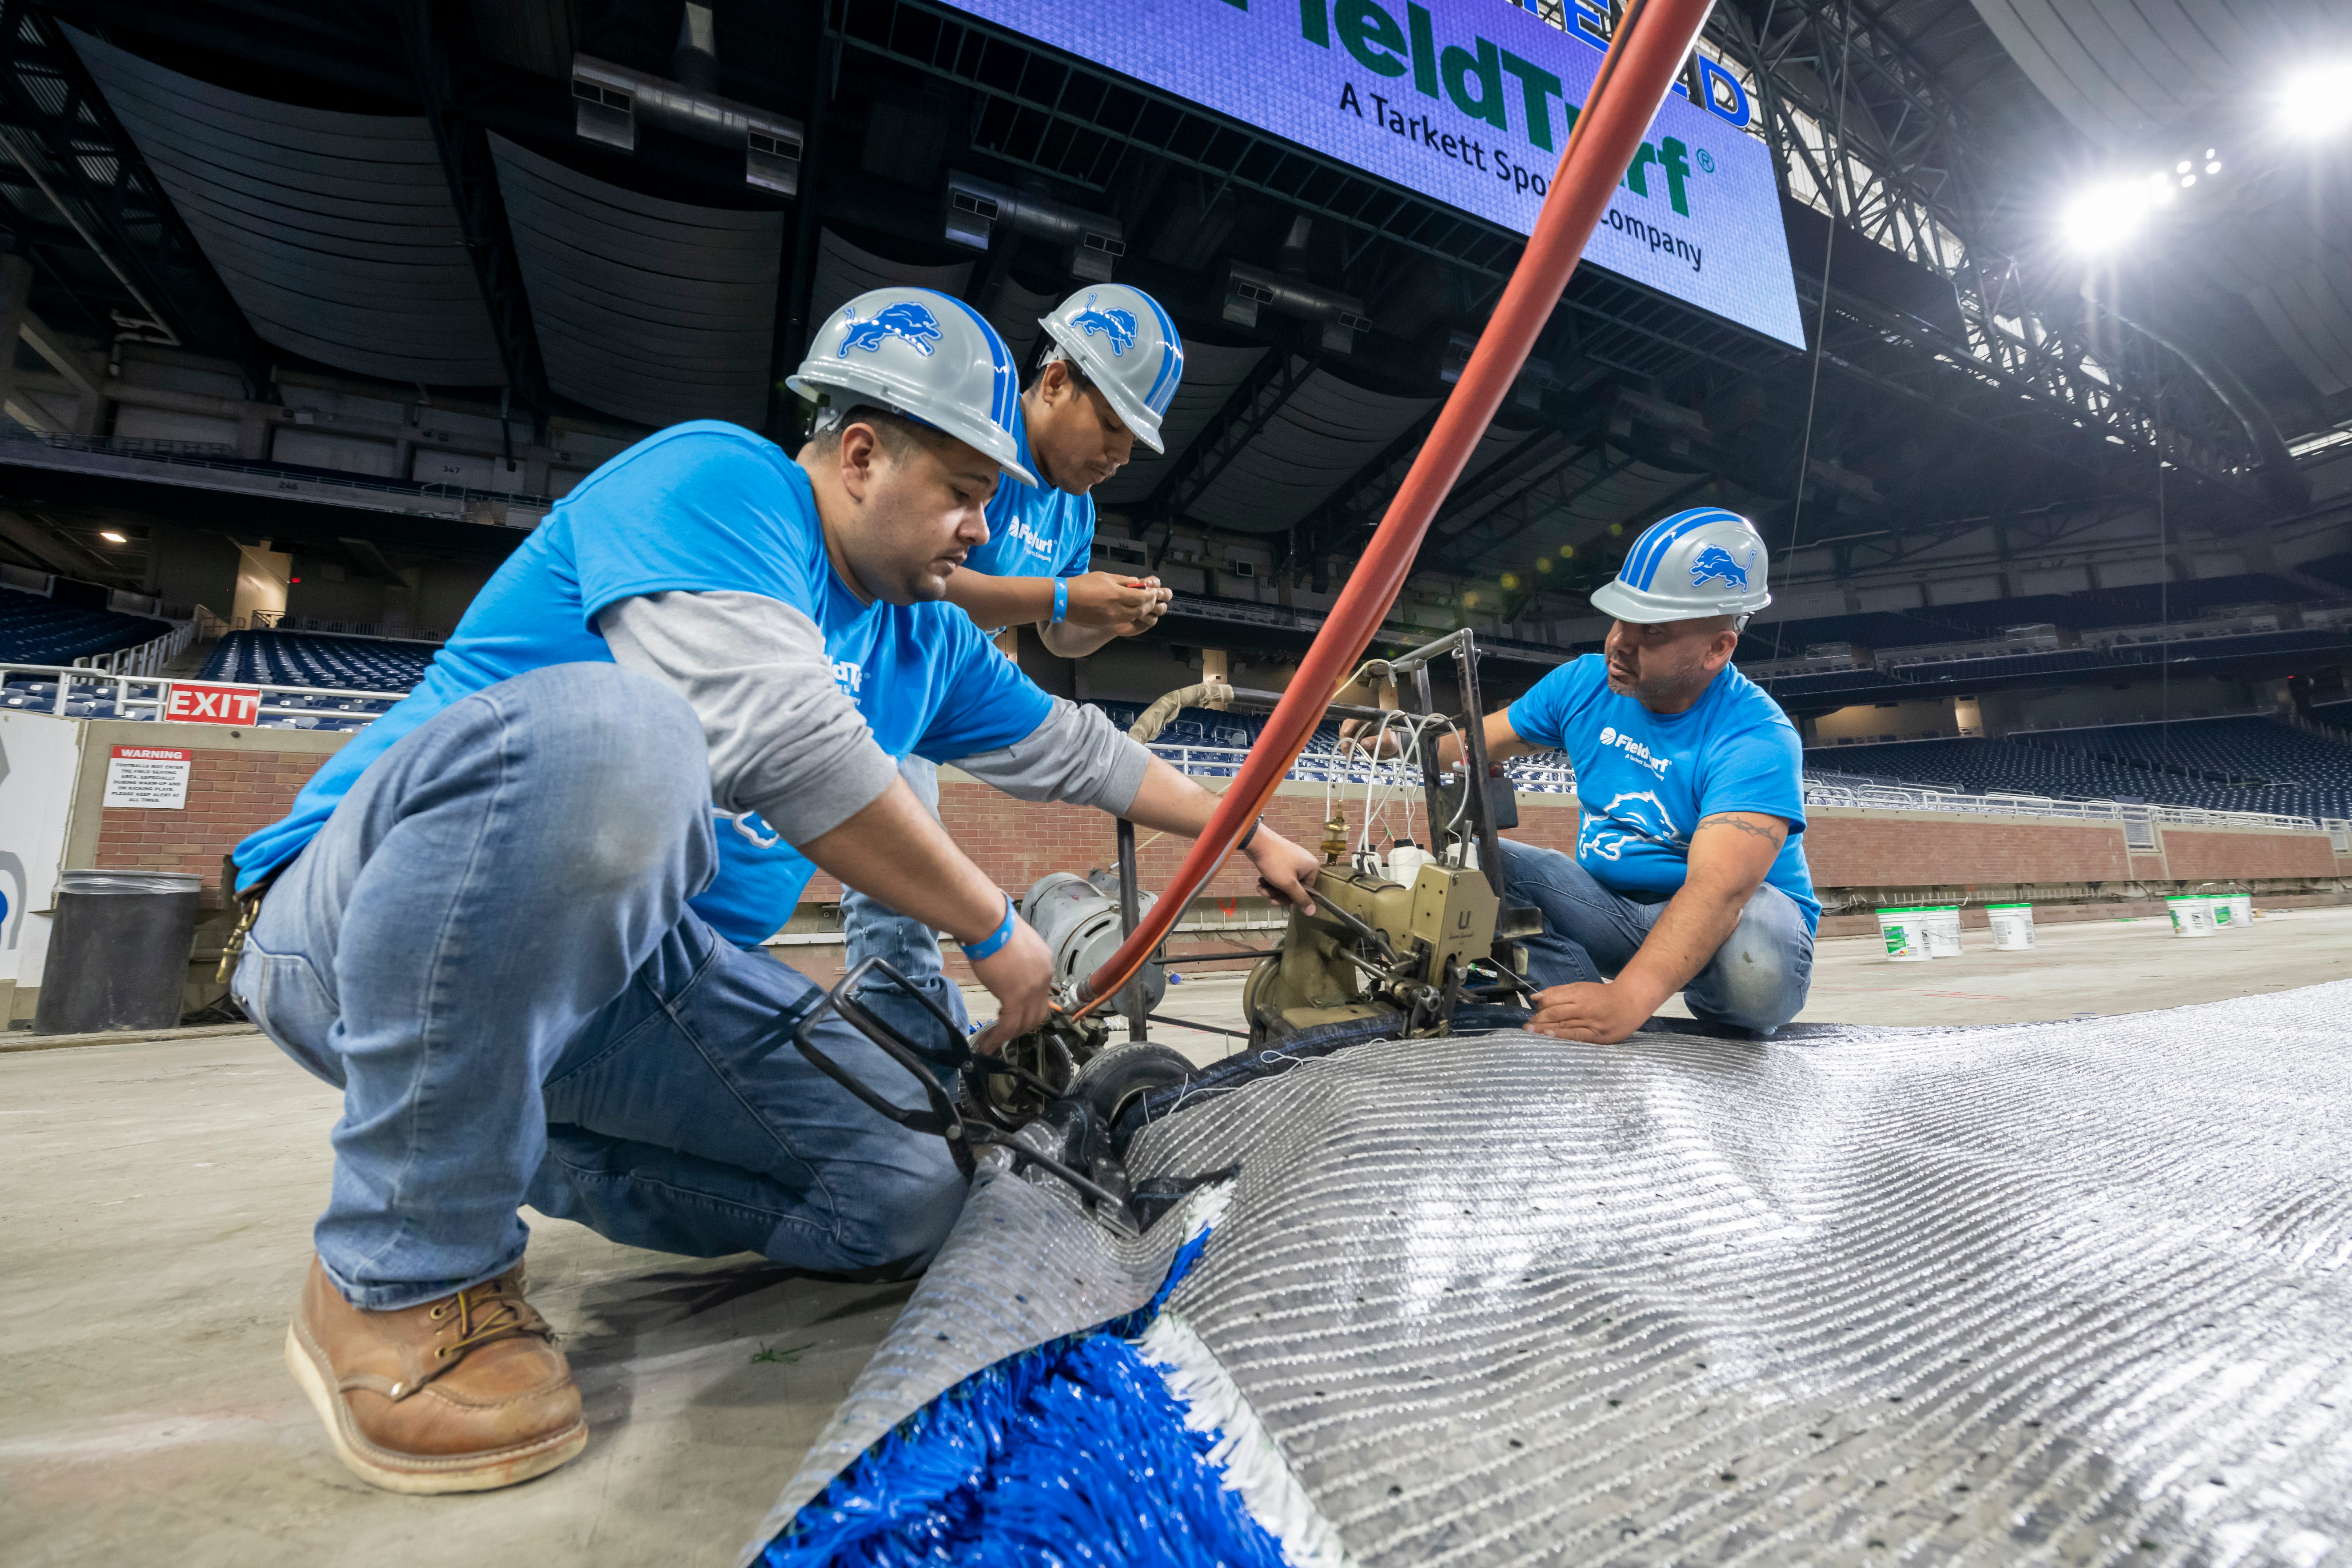 FieldTurf employees use an industrial sewing machine to connect two pieces of a new playing surface together.